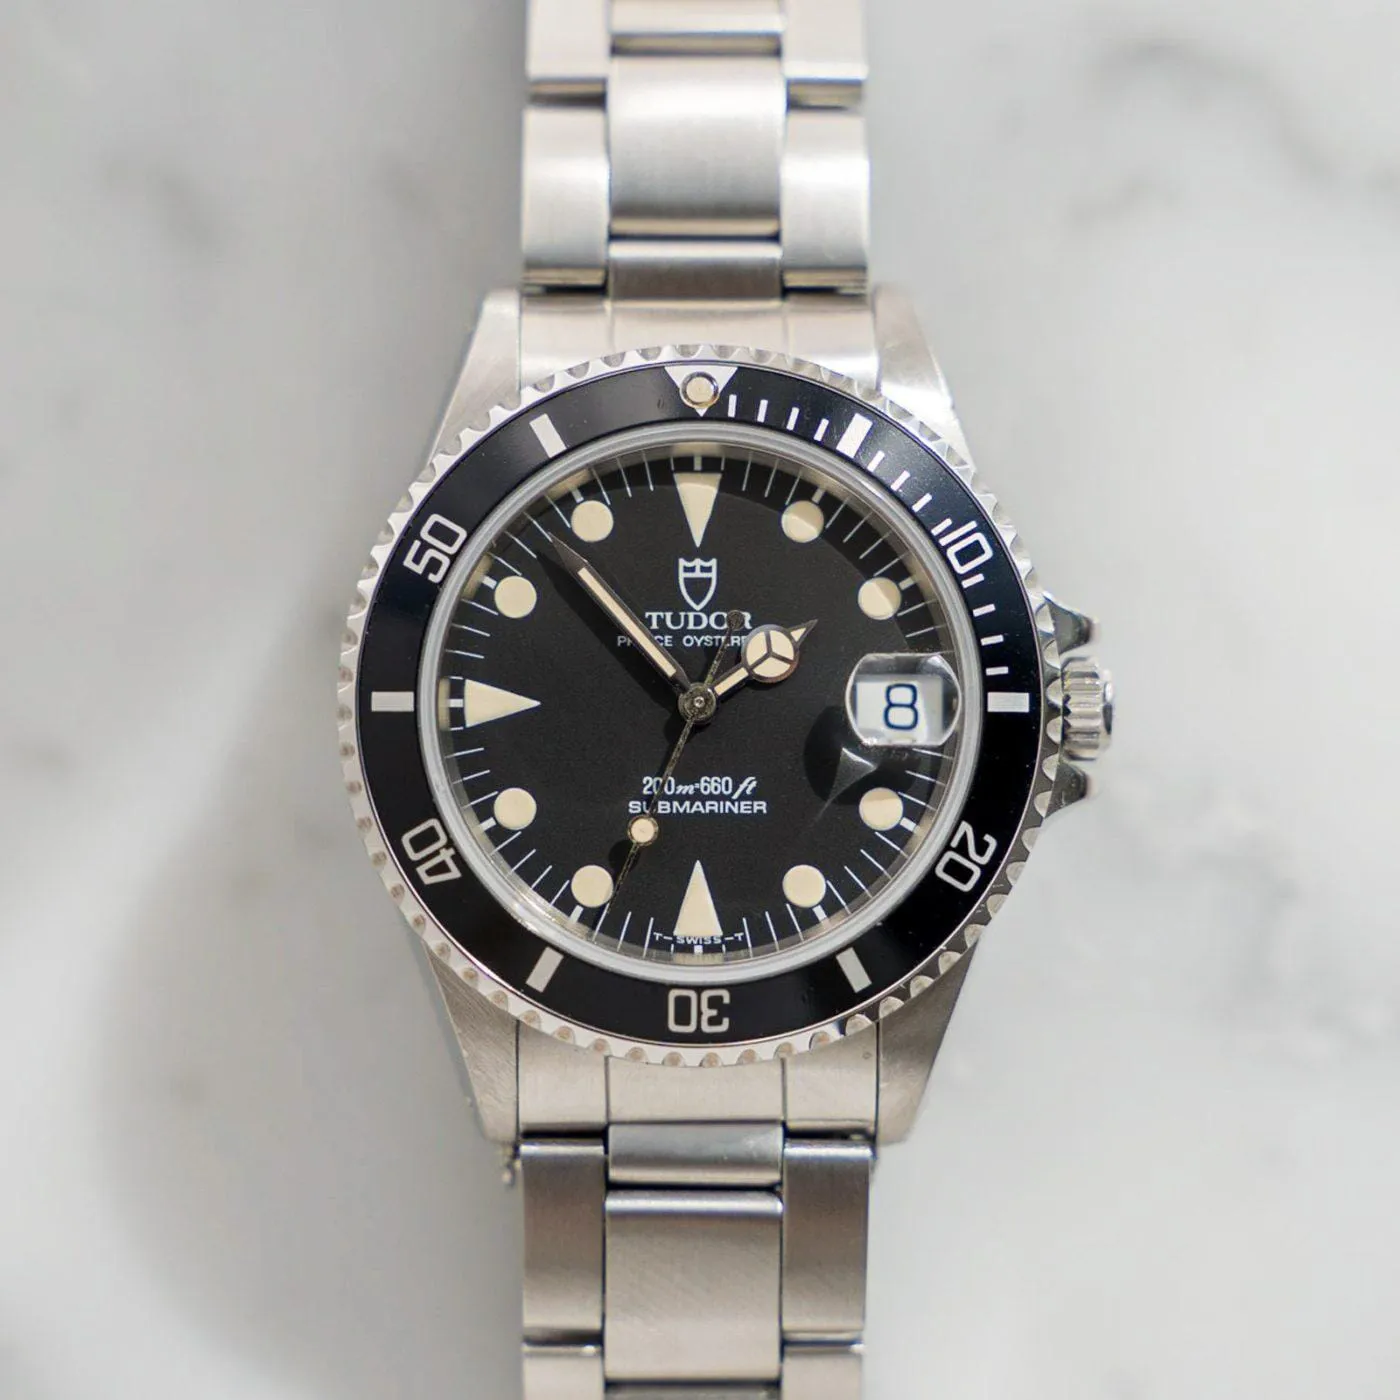 Tudor Prince Oysterdate Submariner 75090 36mm Stainless steel